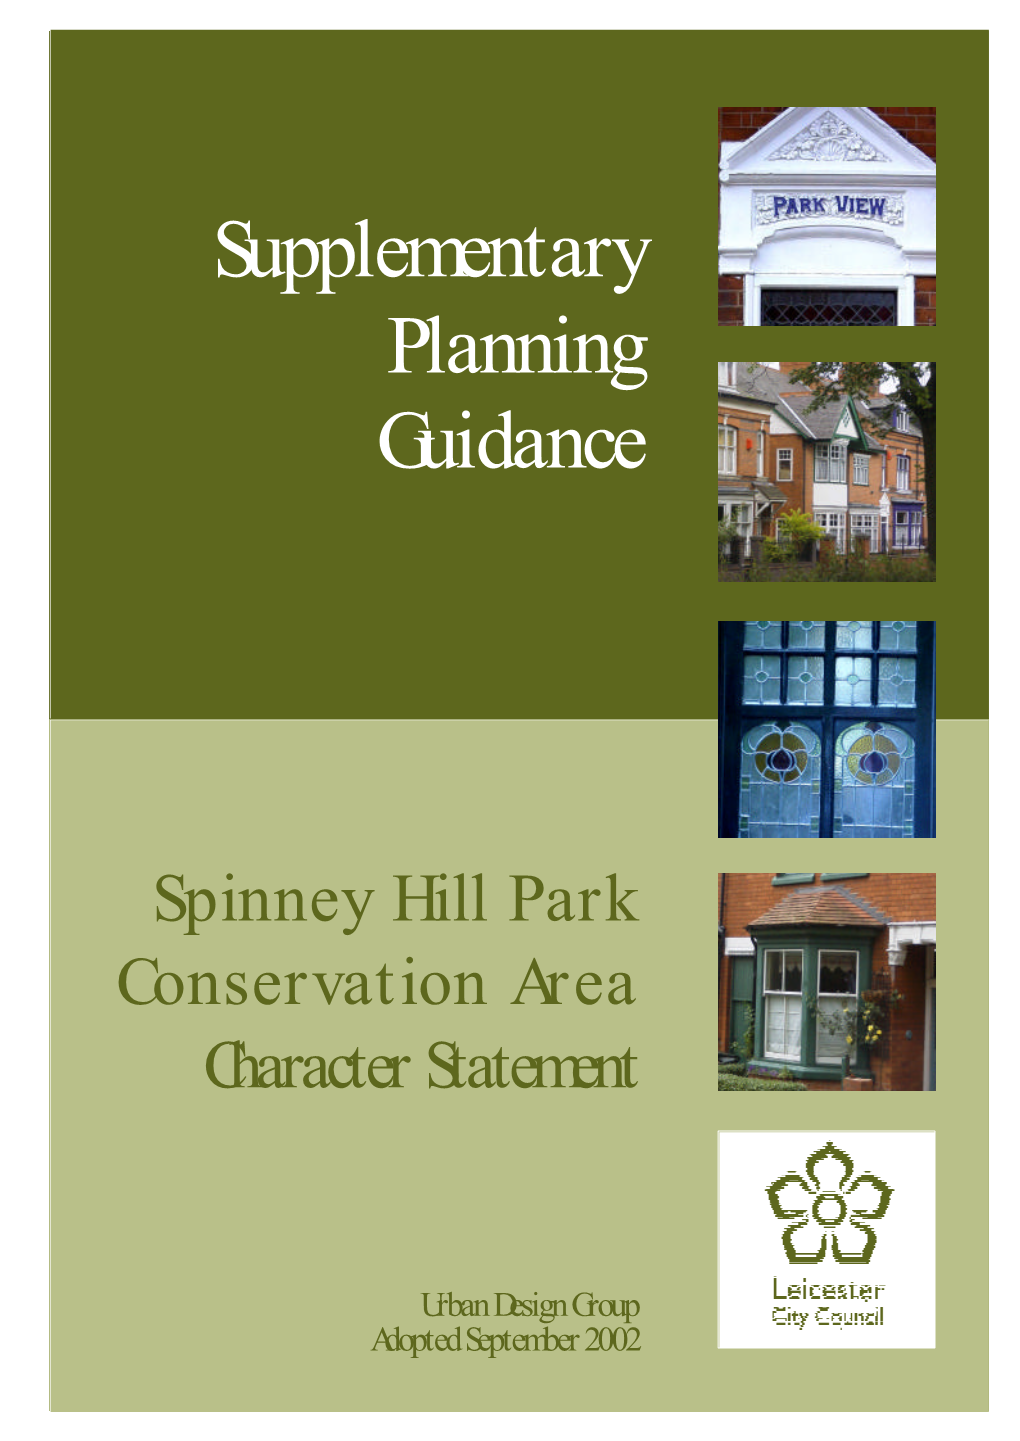 Spinney Hill Park Conservation Area Character Statement